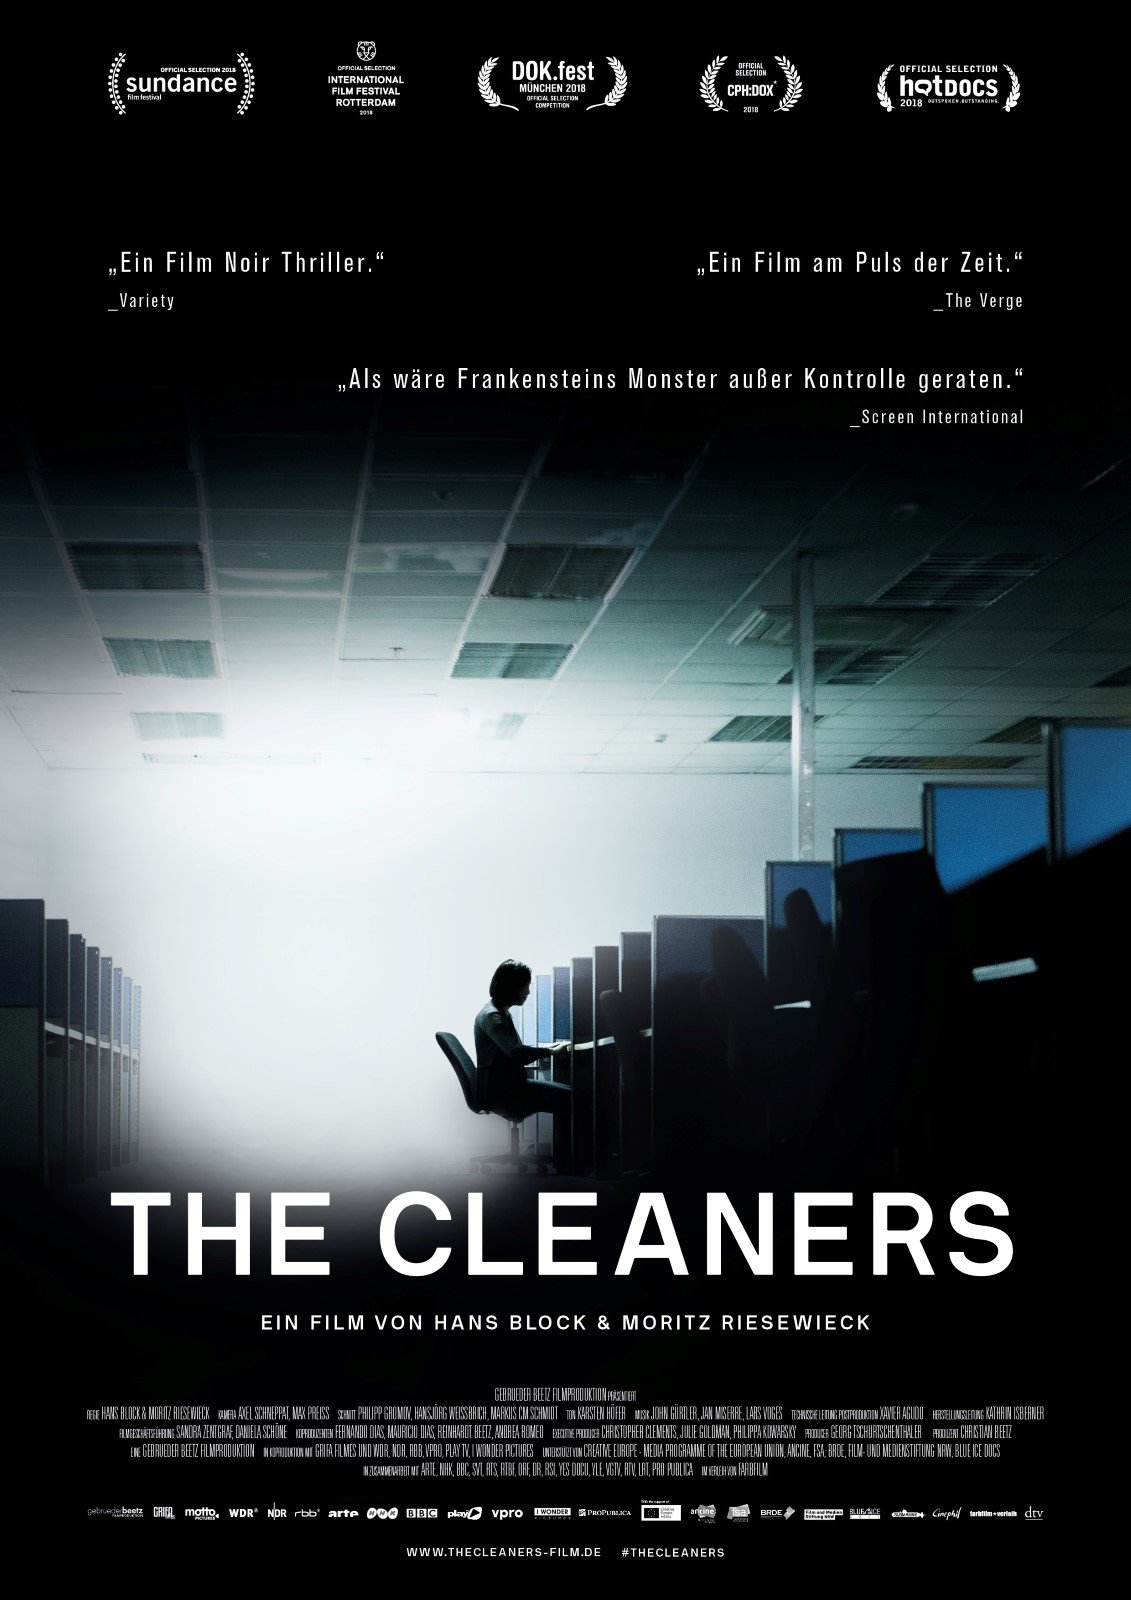 movie review for the cleaner